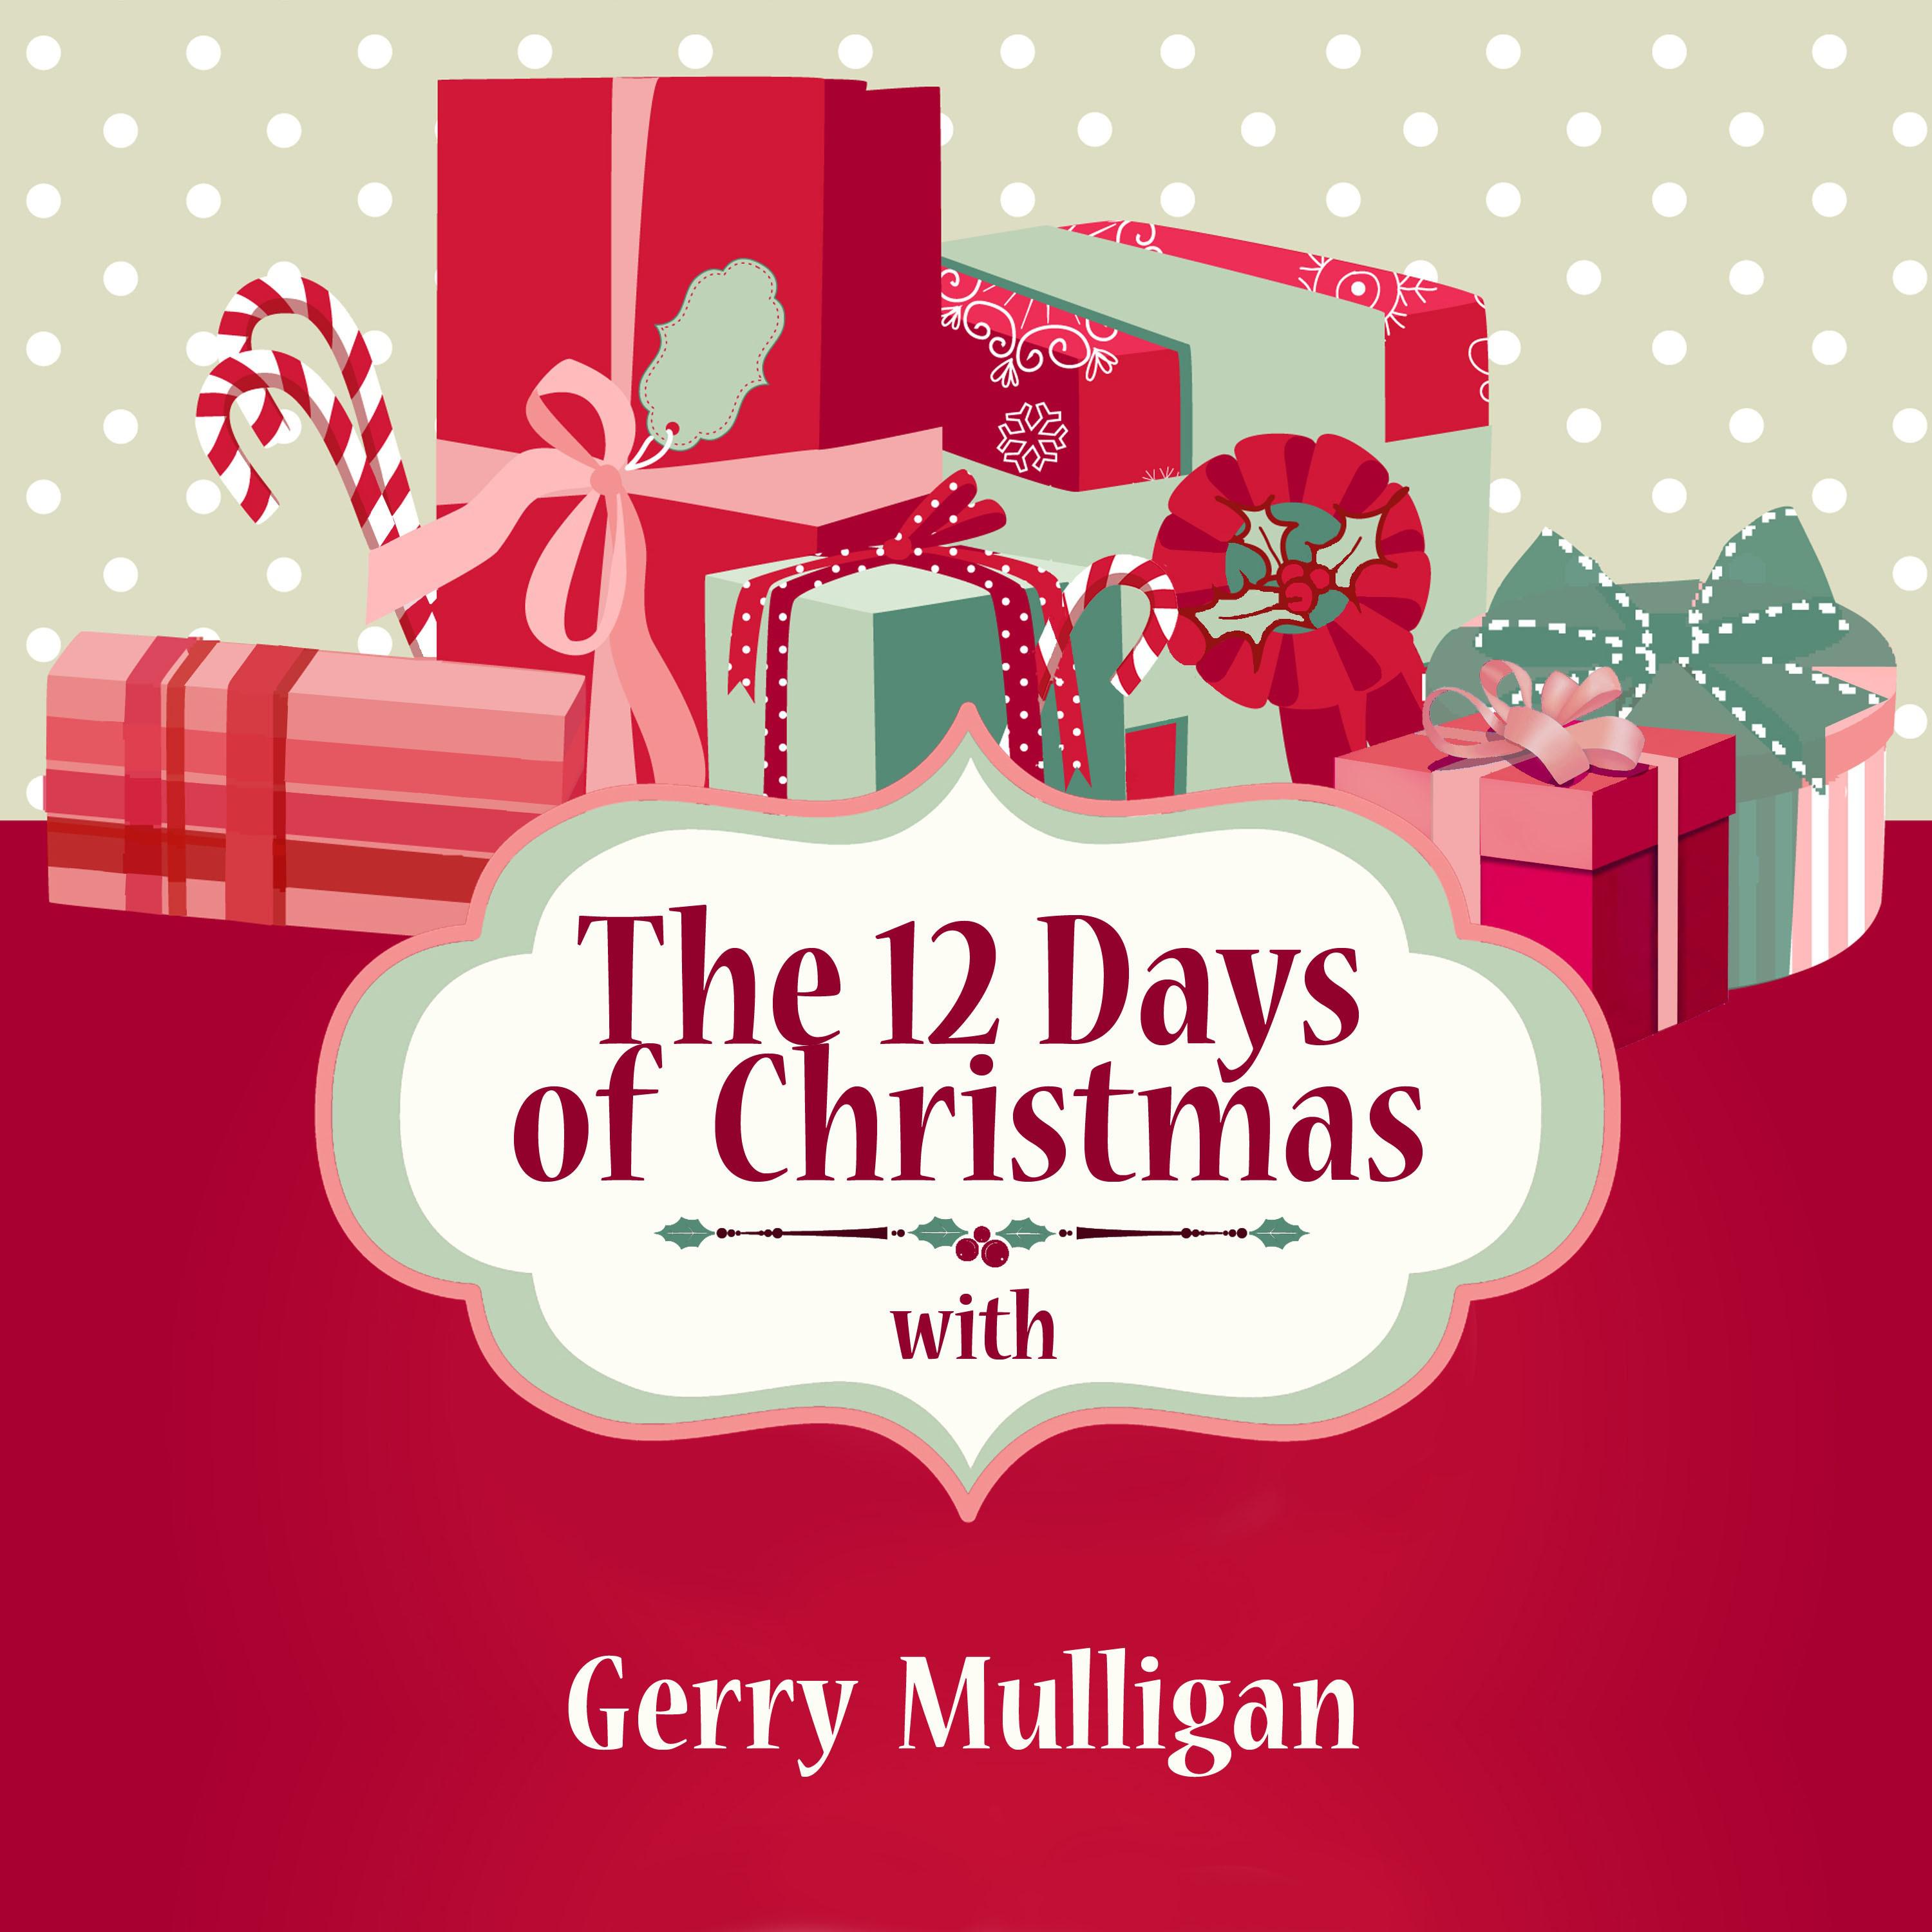 The 12 Days of Christmas with Gerry Mulligan